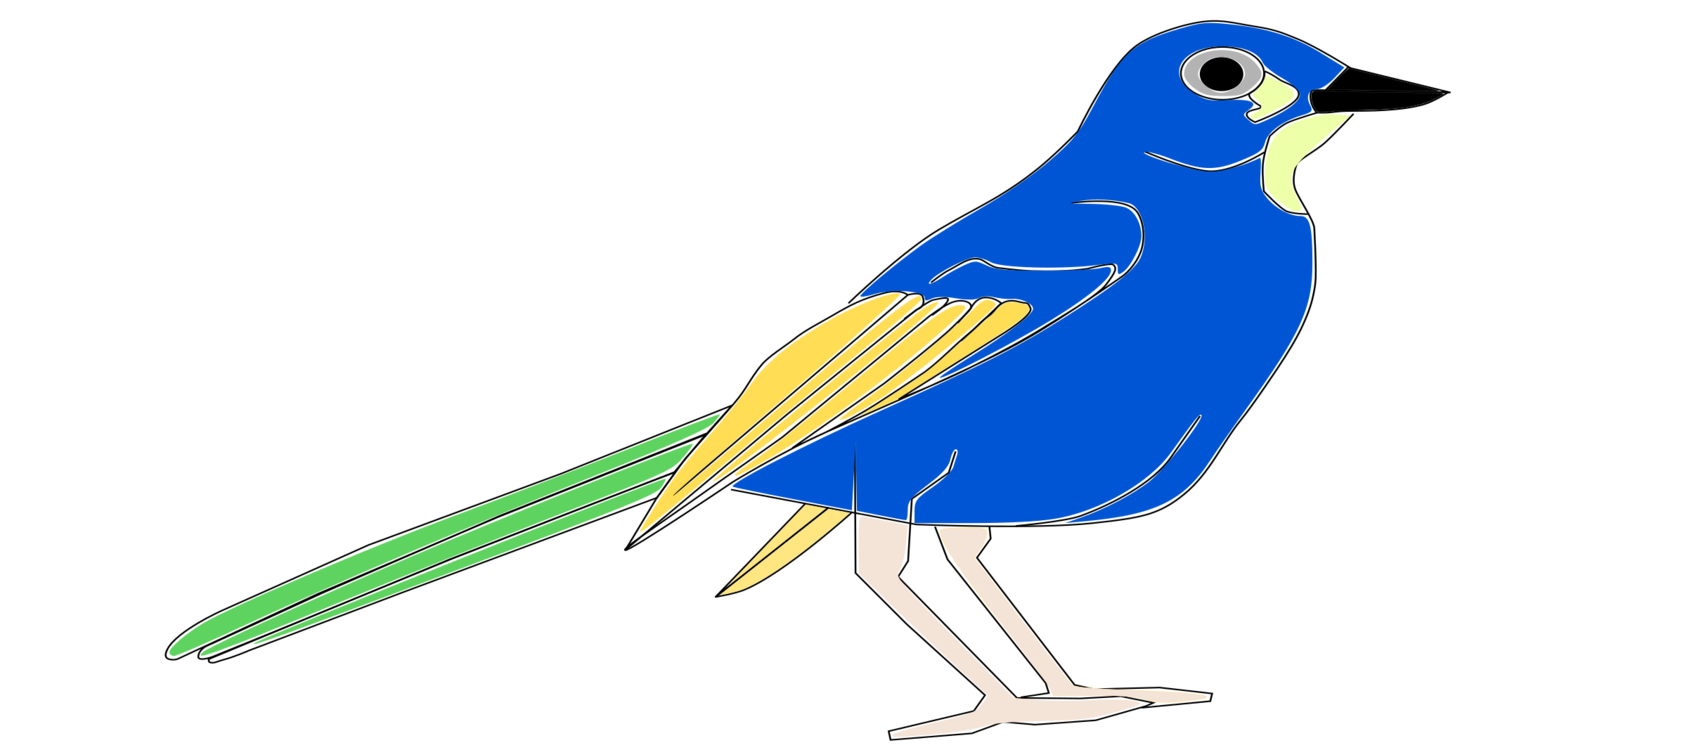 Blue Jay Clipart Images, Free Download